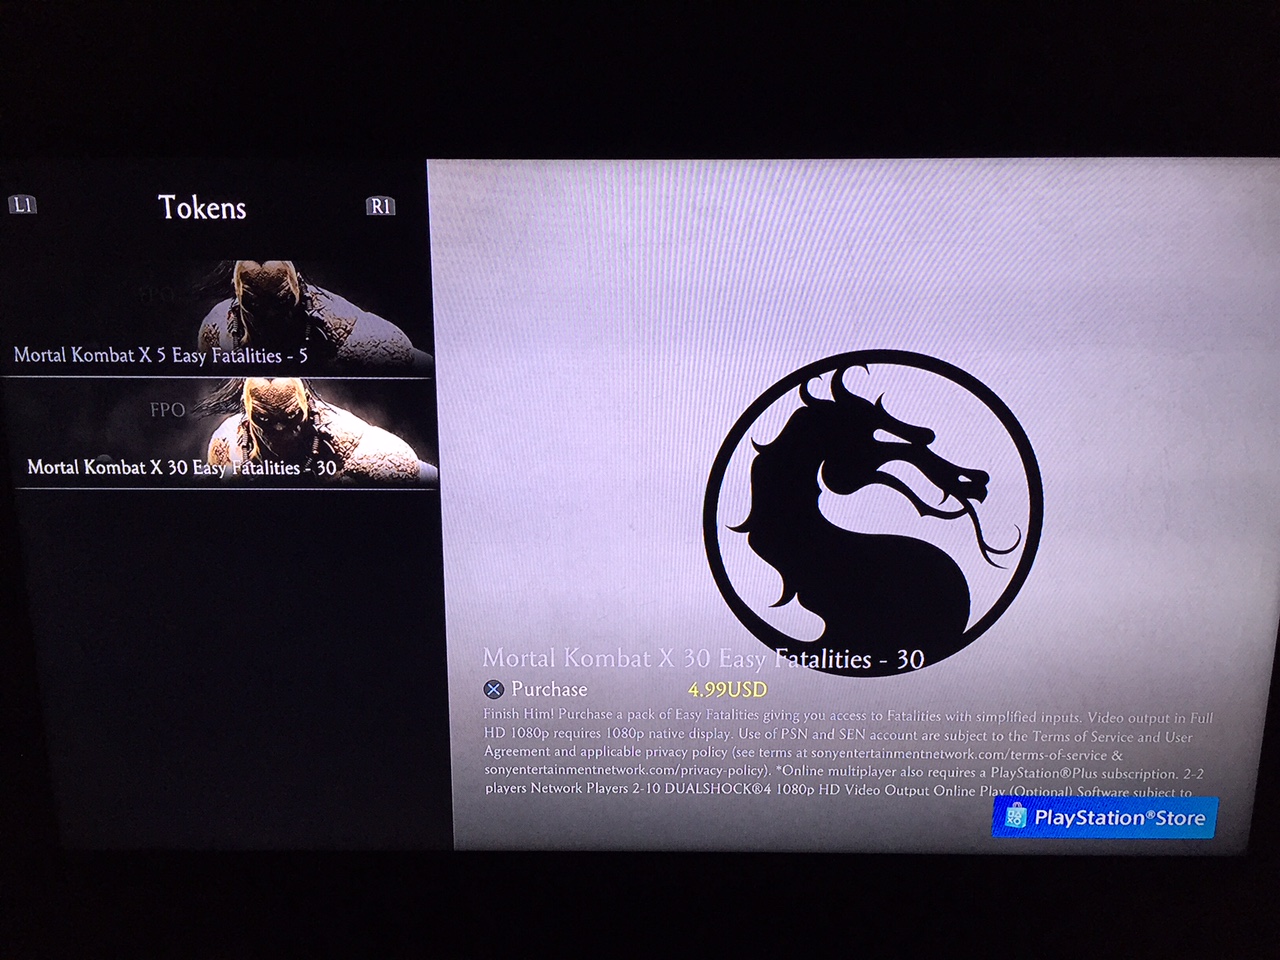 “Mortal Kombat X” Has Easy-Fatality Microtransactions - Pay for Easy Fatalities or Practice Long and Hard